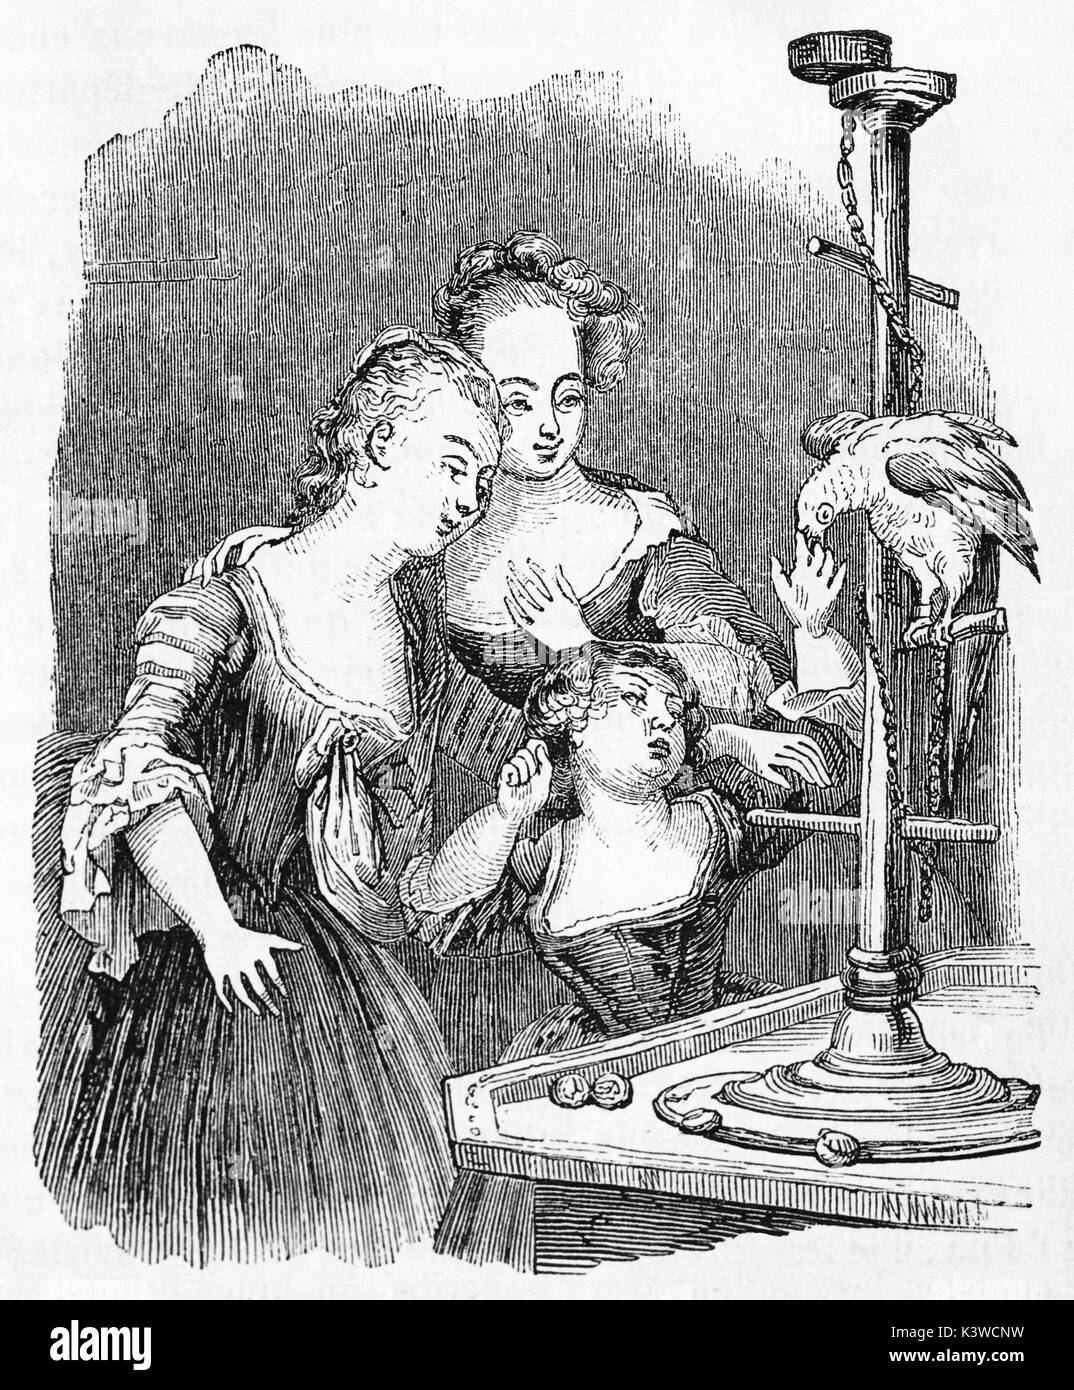 Old illustration of girls and parrot. Created by Watteau, published on Magasin Pittoresque, Paris, 1841 Stock Photo